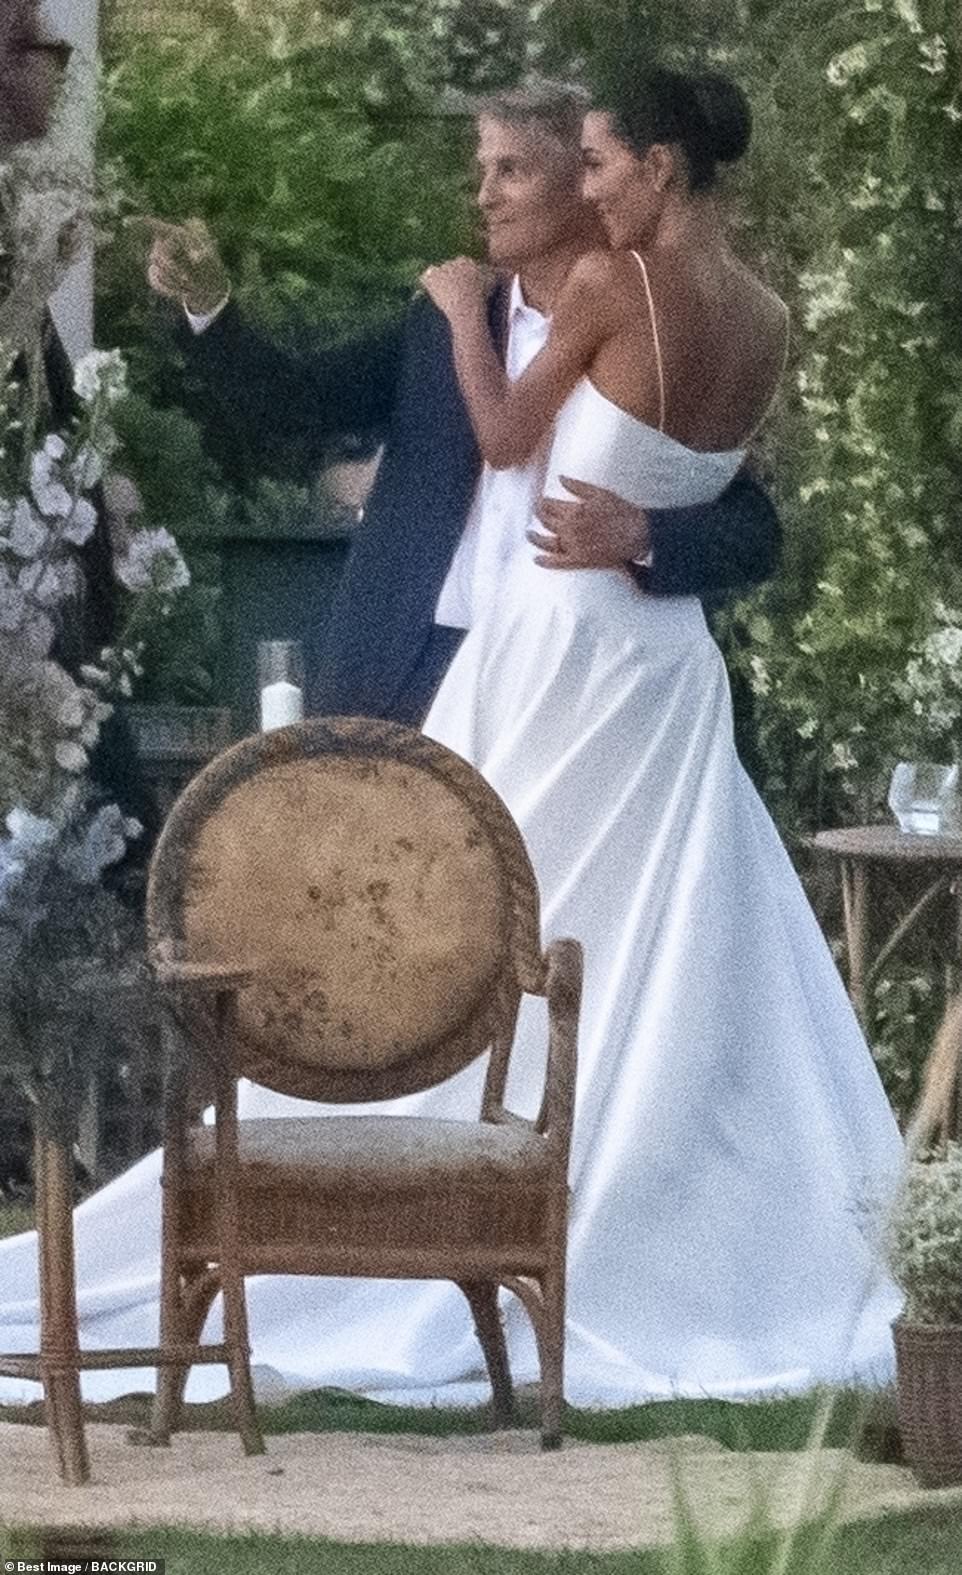 Celebrities flock to Saint Tropez for the wedding of the year as Ari Emanuel says ‘I do’